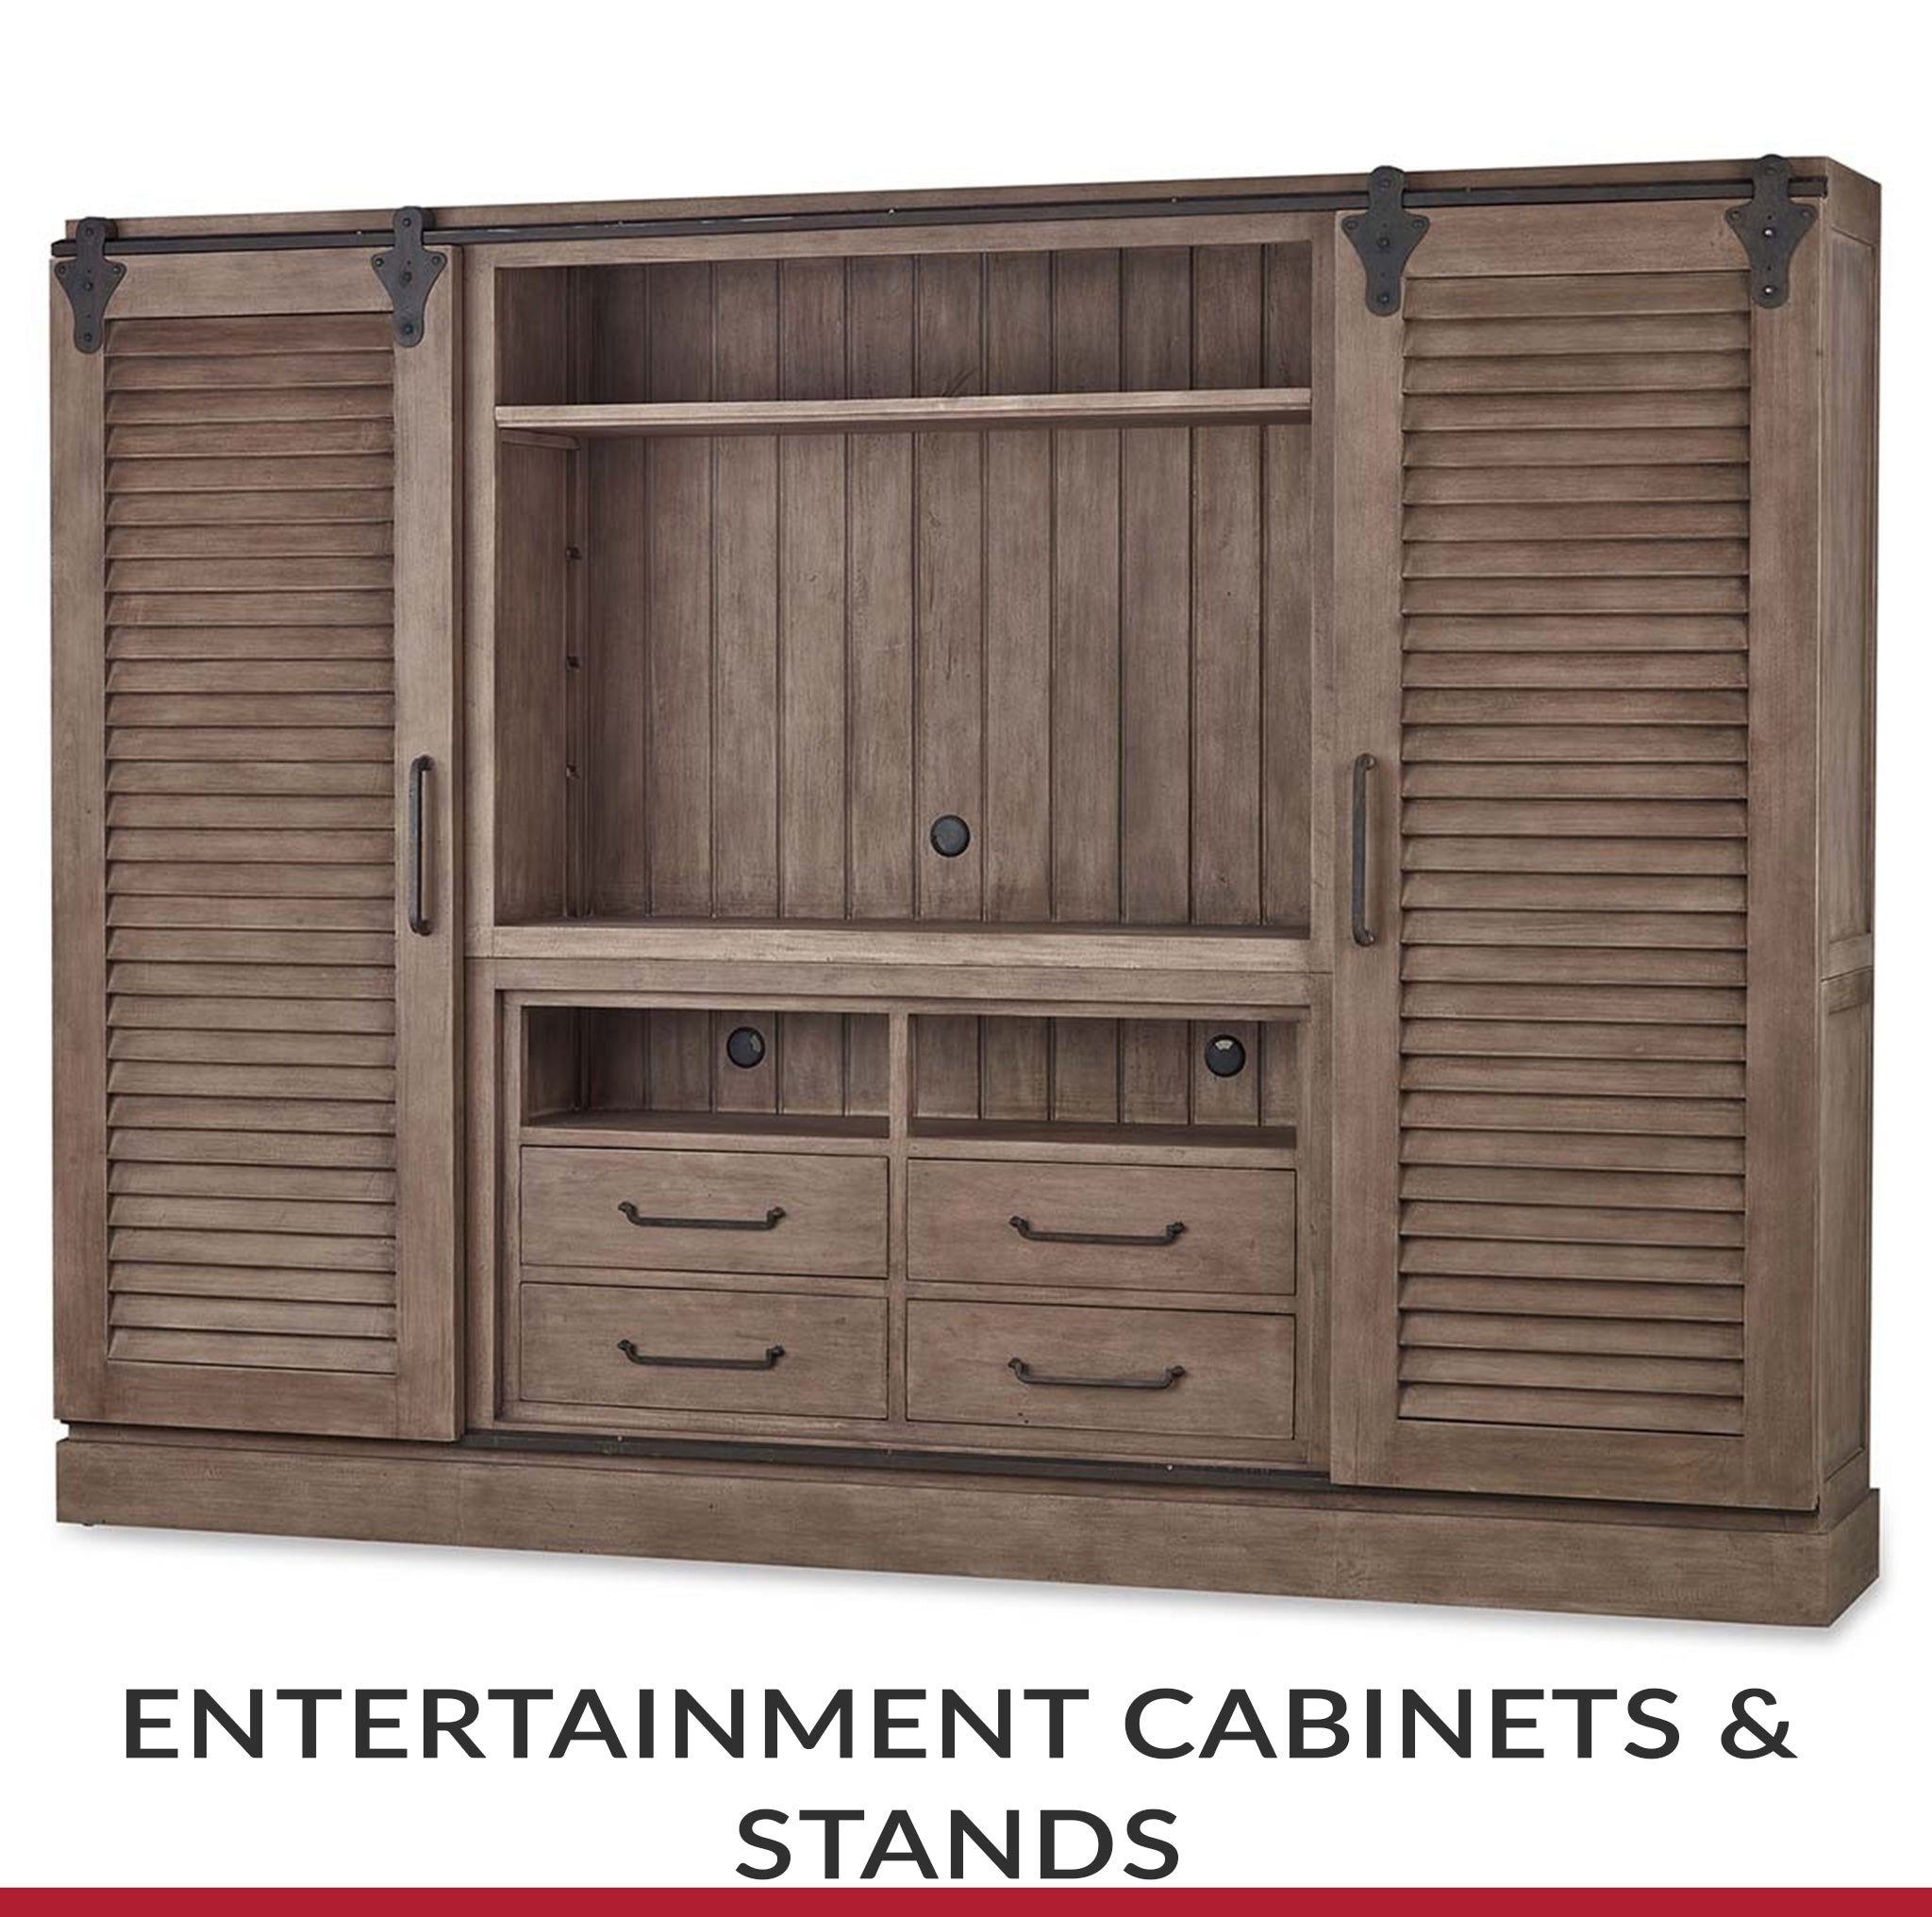 Entertainment Cabinets & Stands